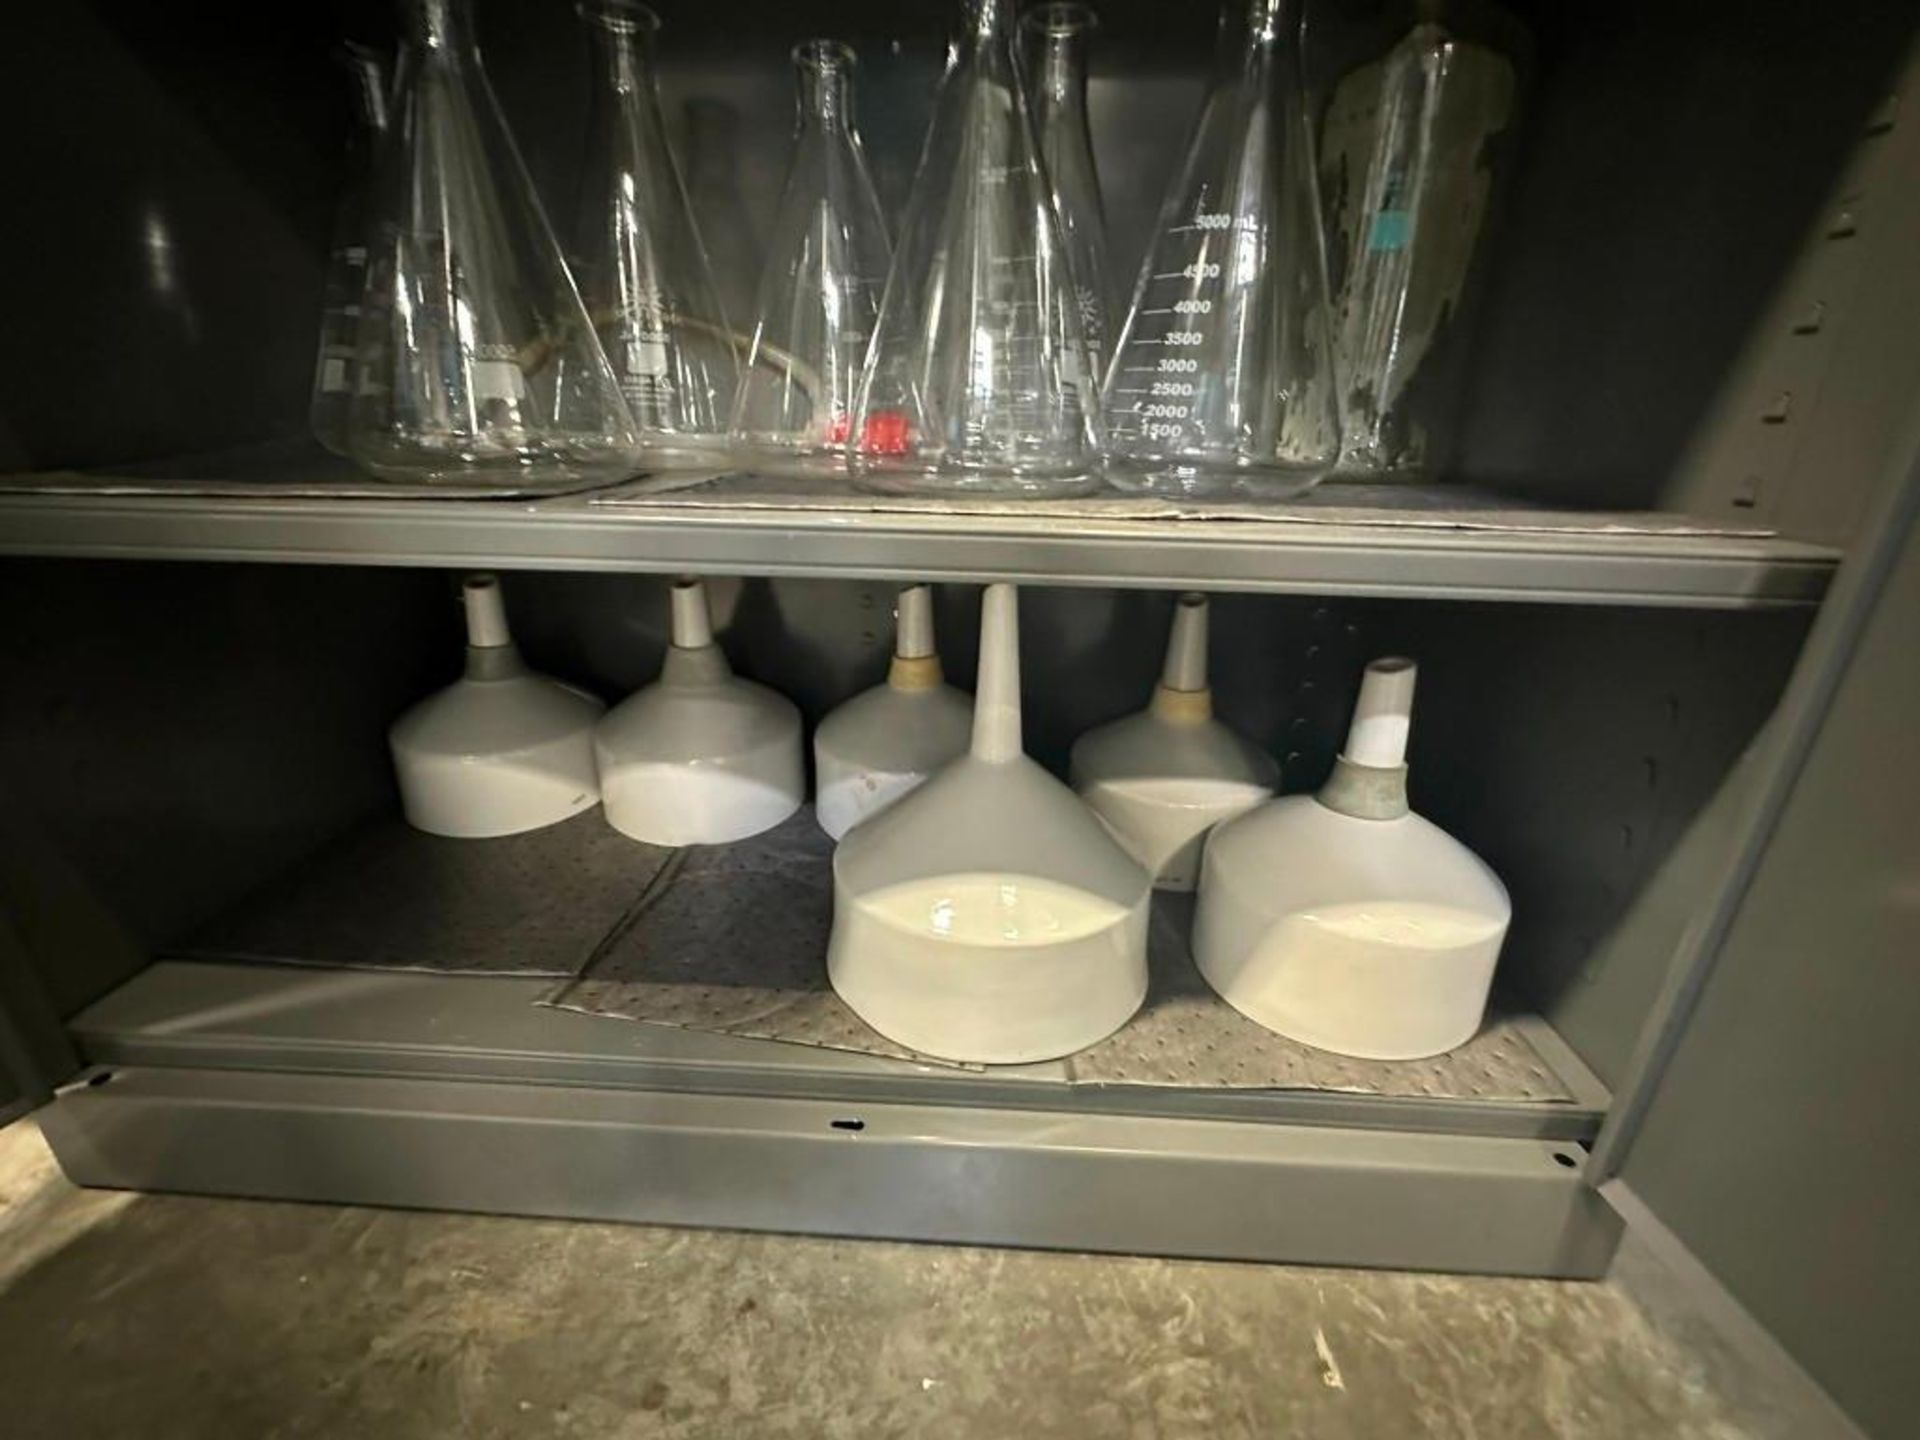 Lot: Uline Steel Cabinet with Assorted Glassware and Misc. Contents - Image 5 of 6